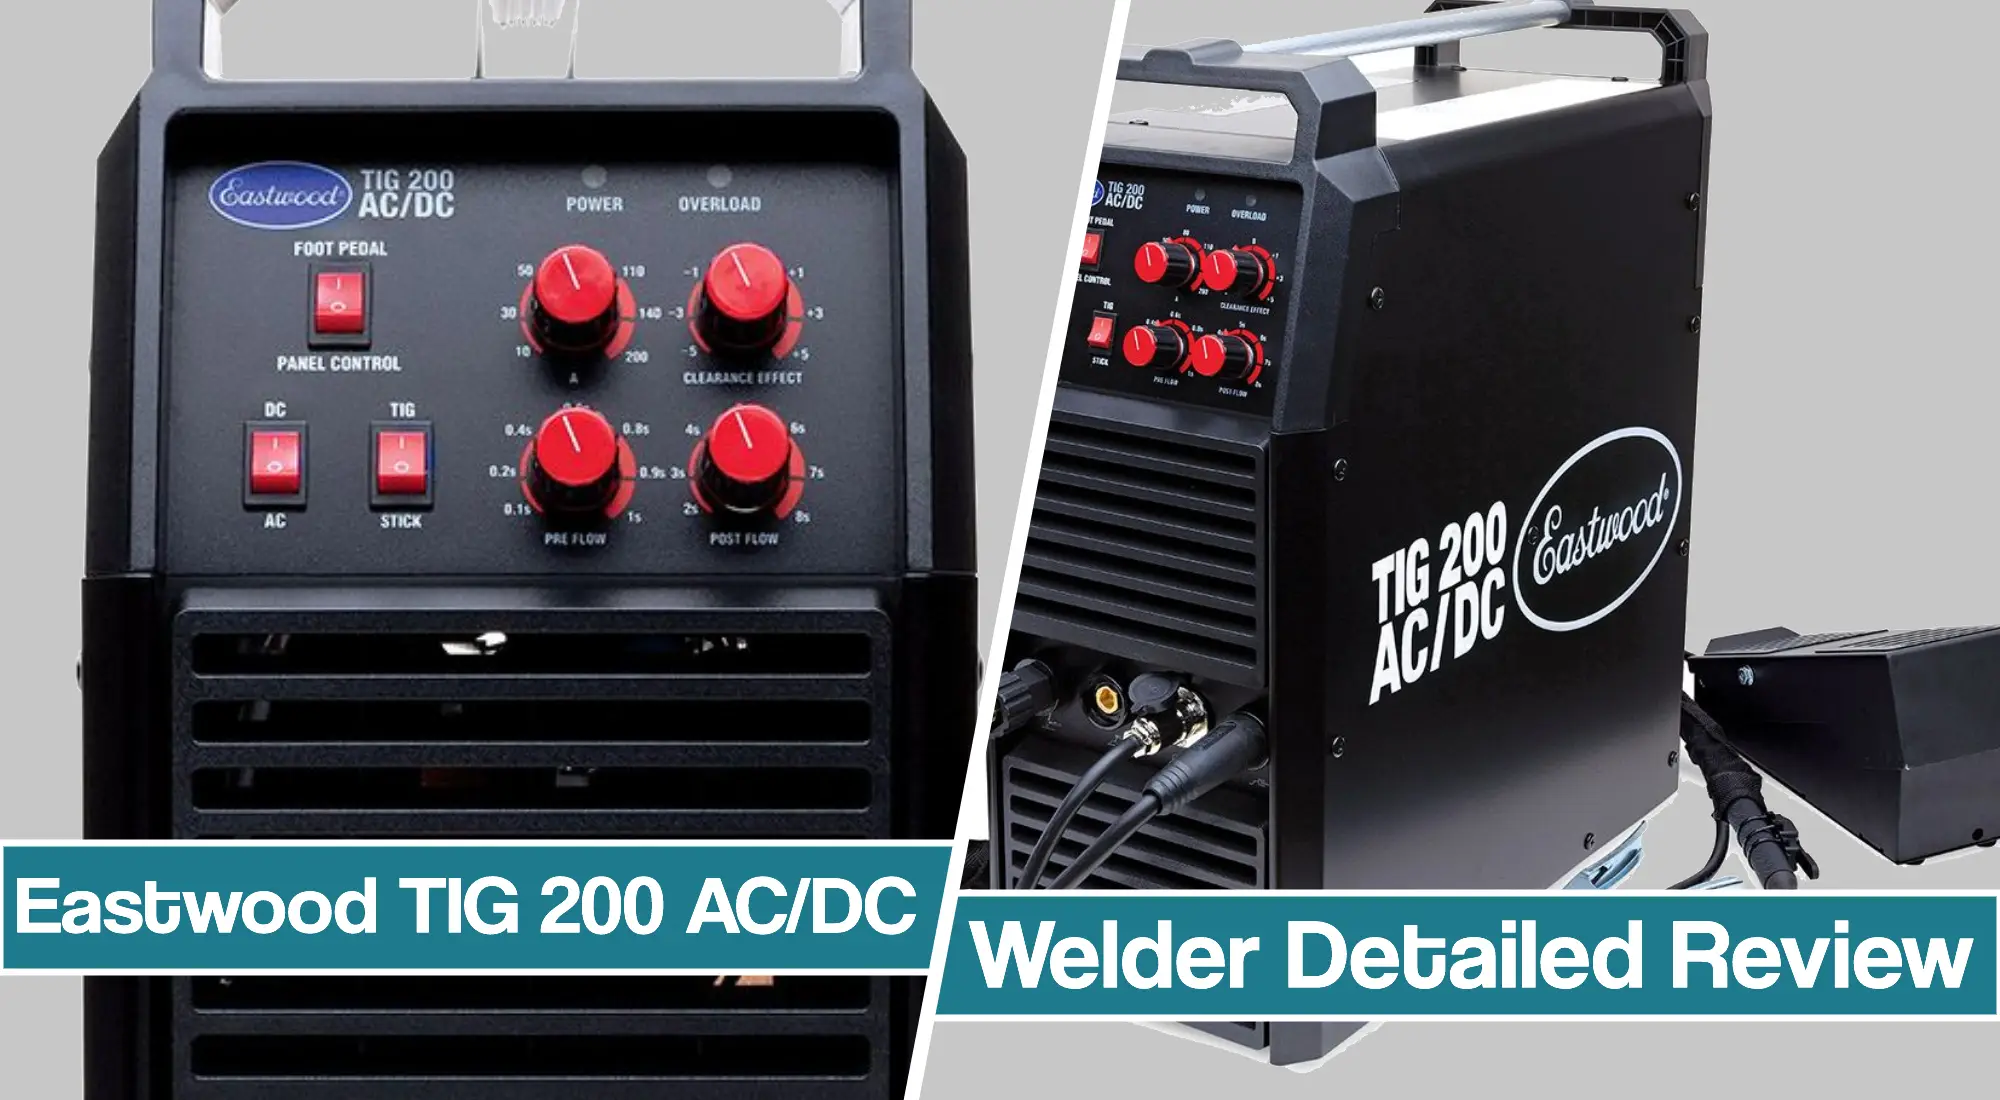 Eastwood TIG 200 AC/DC Review – Detailed Overview Of Package Content, Specifications, and Features